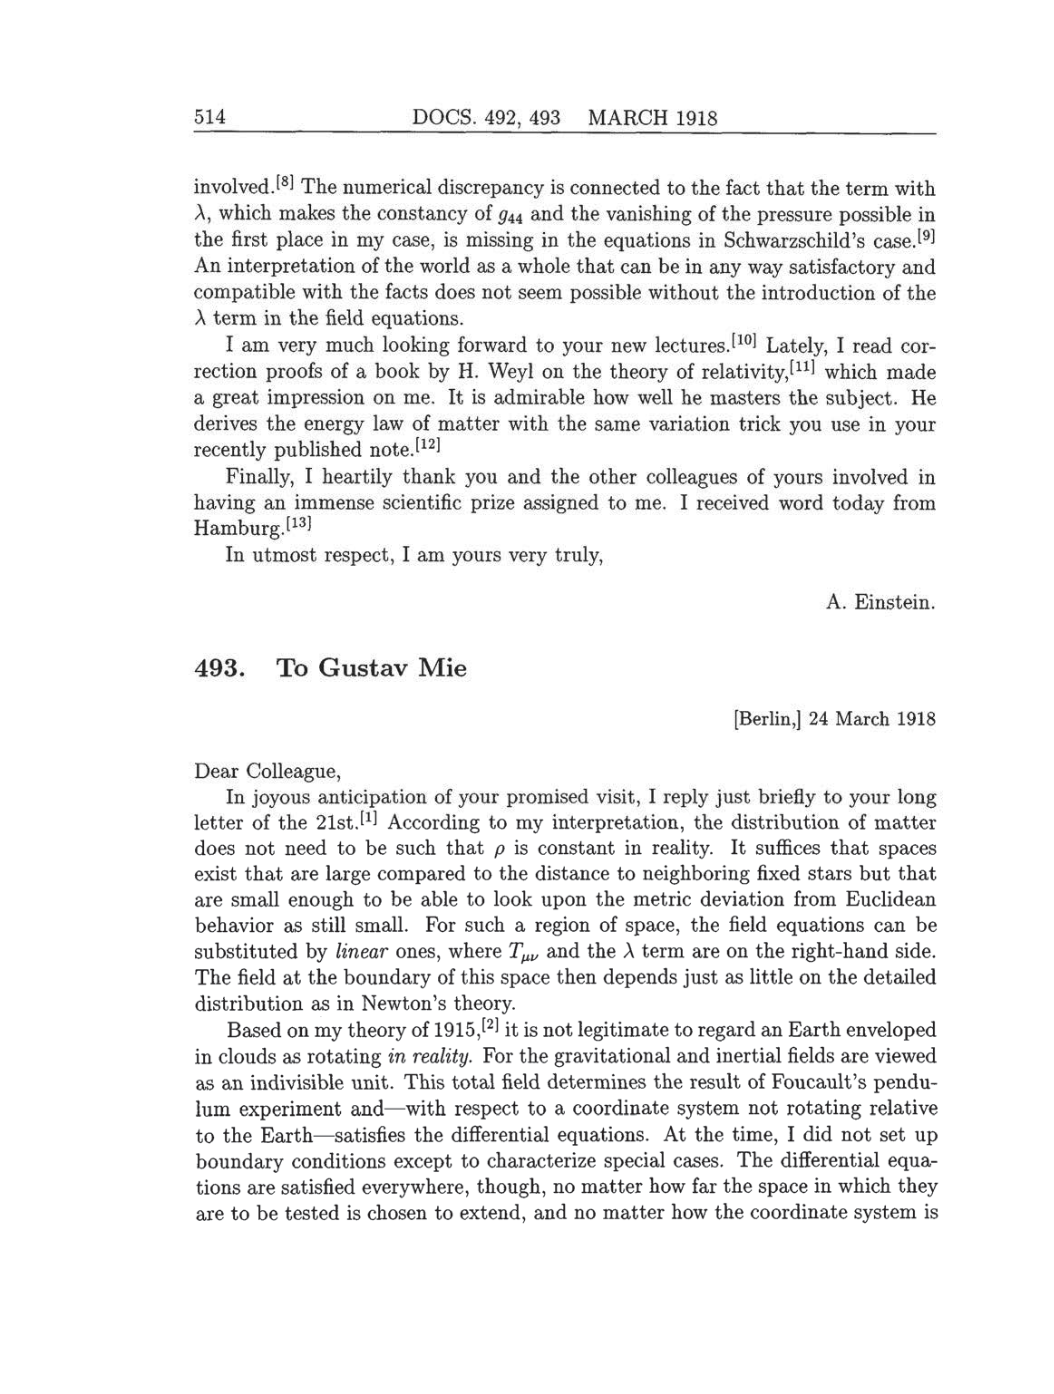 Volume 8: The Berlin Years: Correspondence, 1914-1918 (English translation supplement) page 514